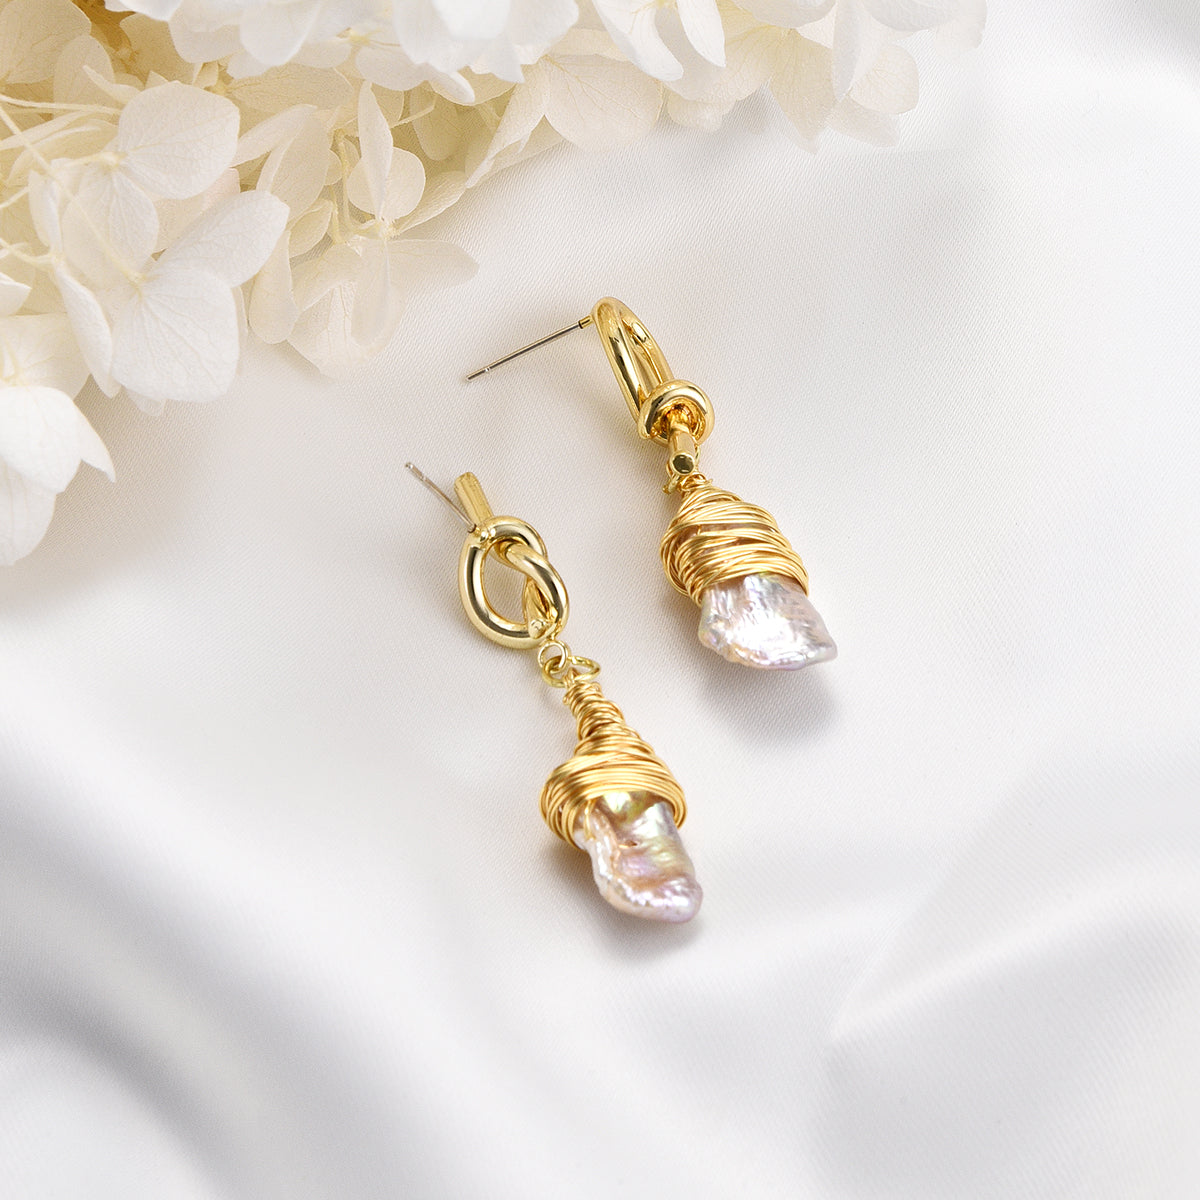 Artzy white and gold set of earrings